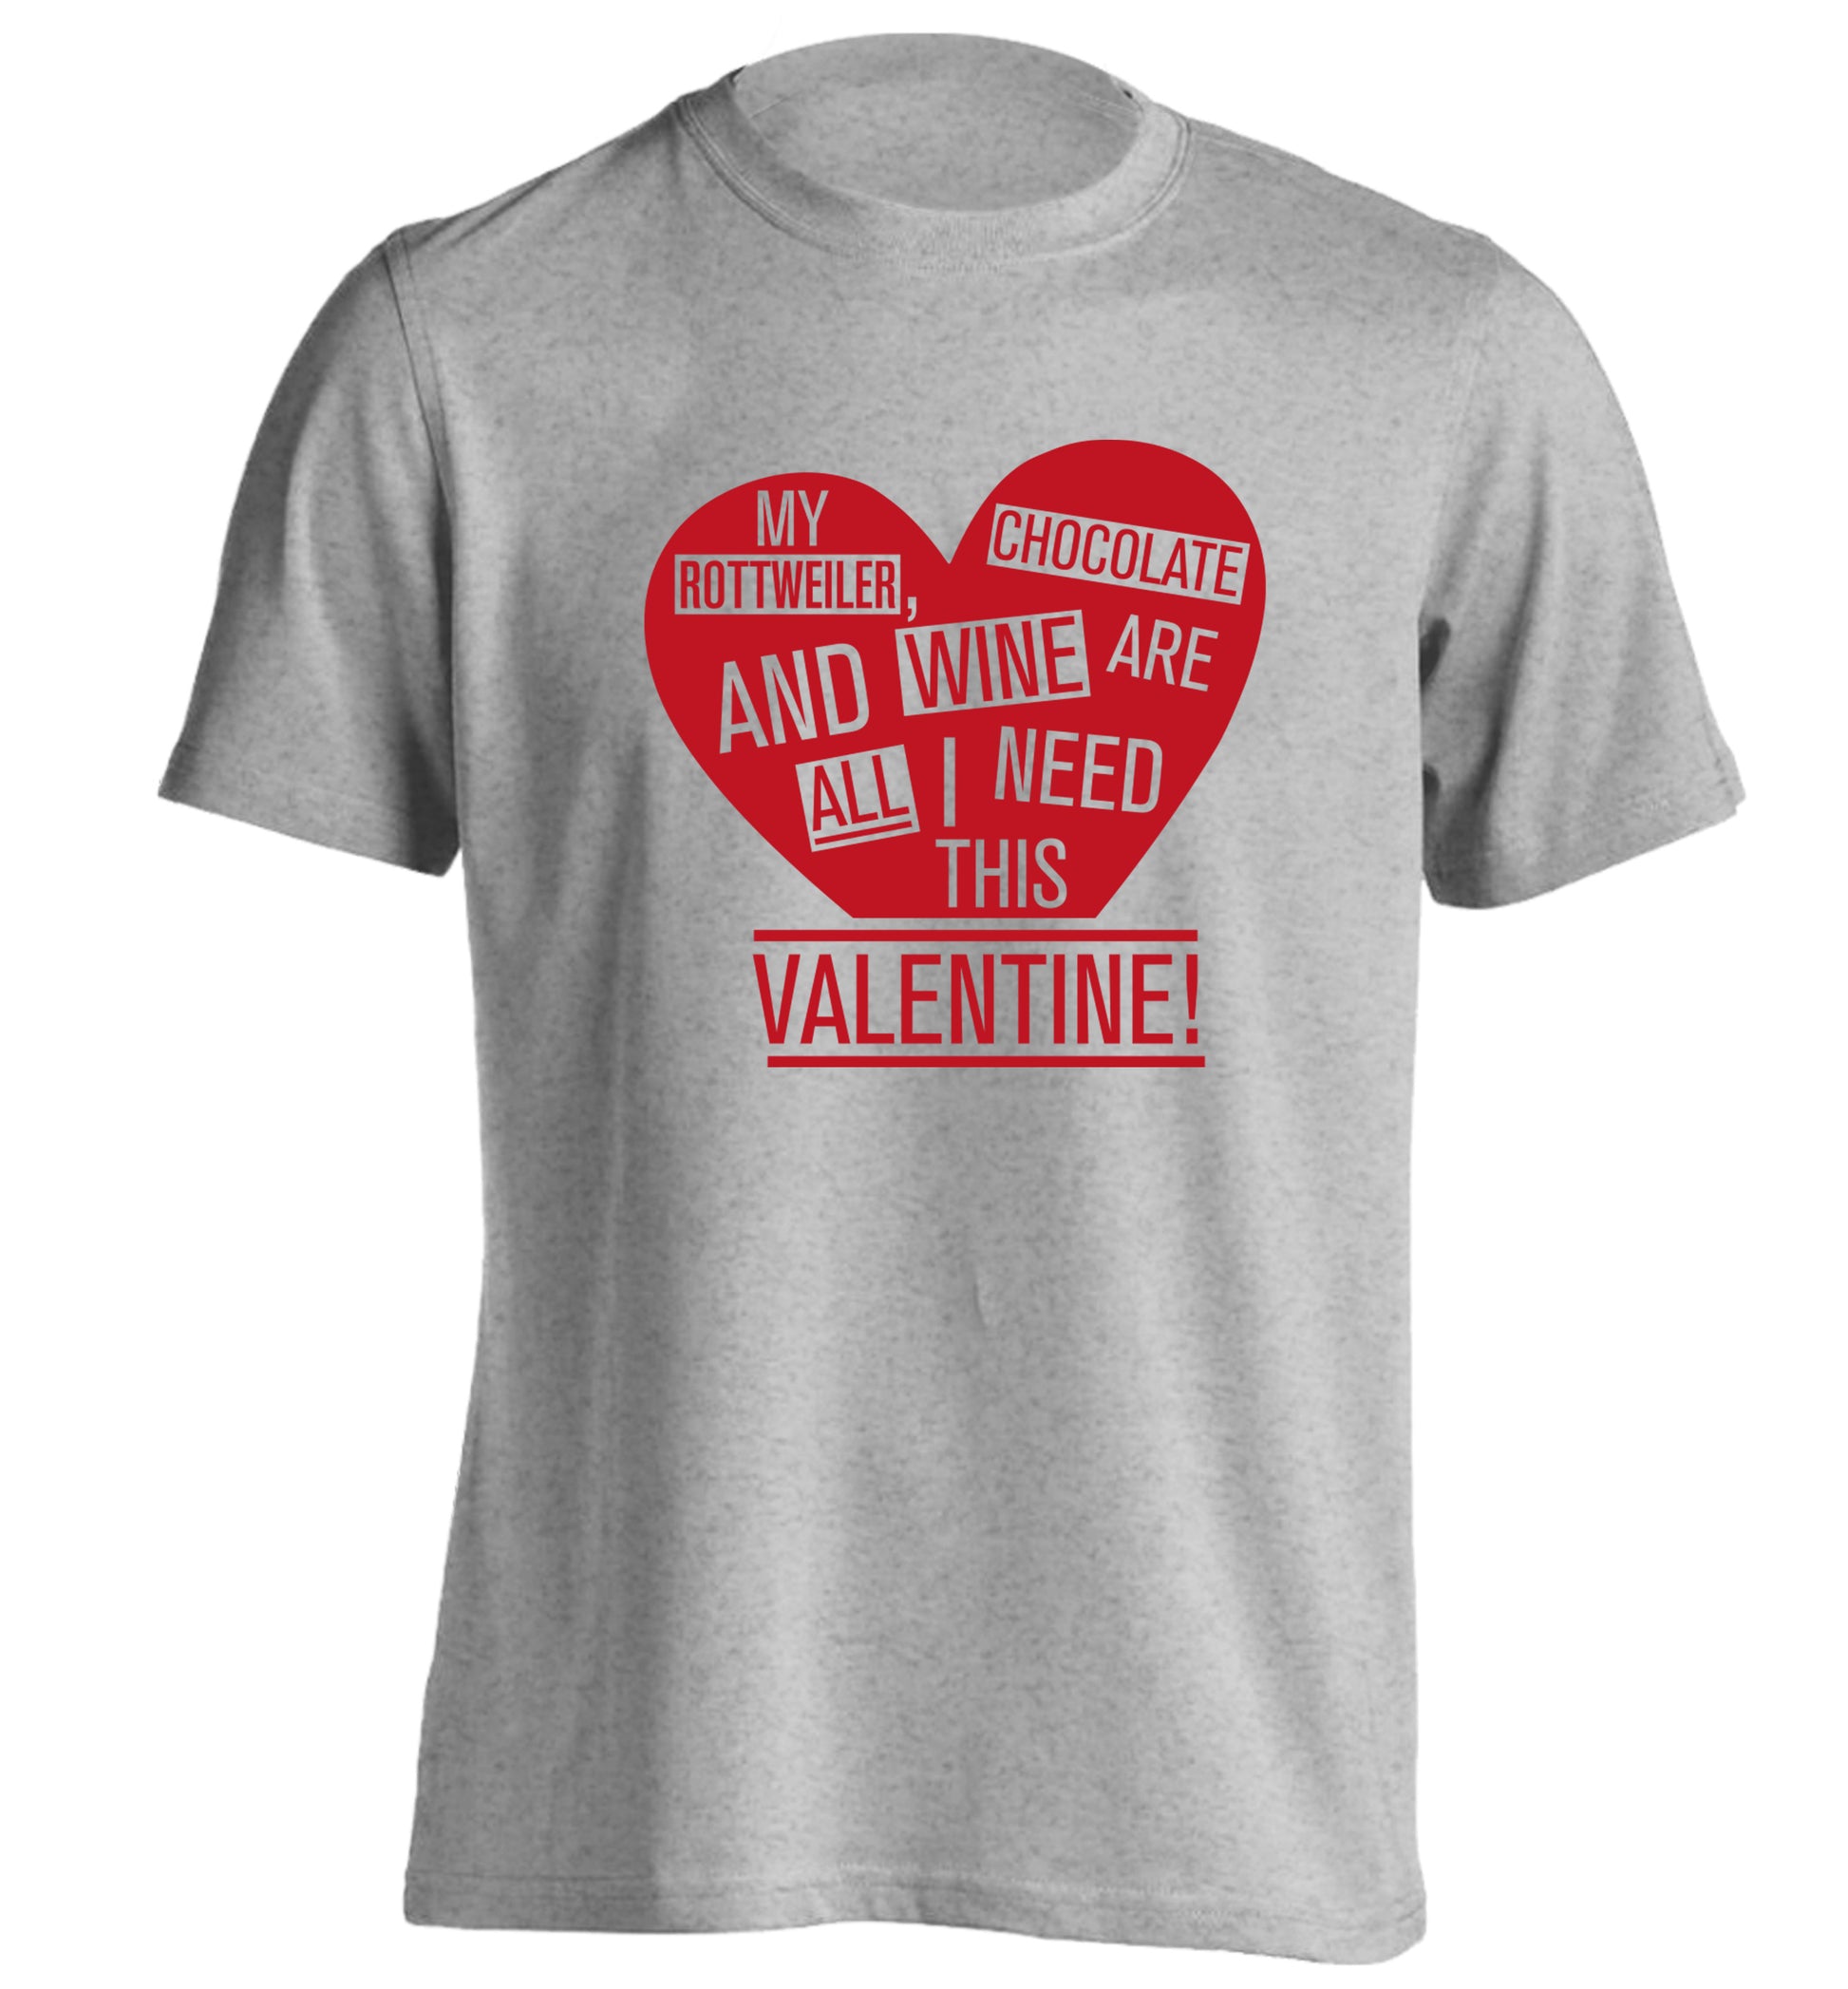 My rottweiler, chocolate and wine are all I need this valentine! adults unisex grey Tshirt 2XL